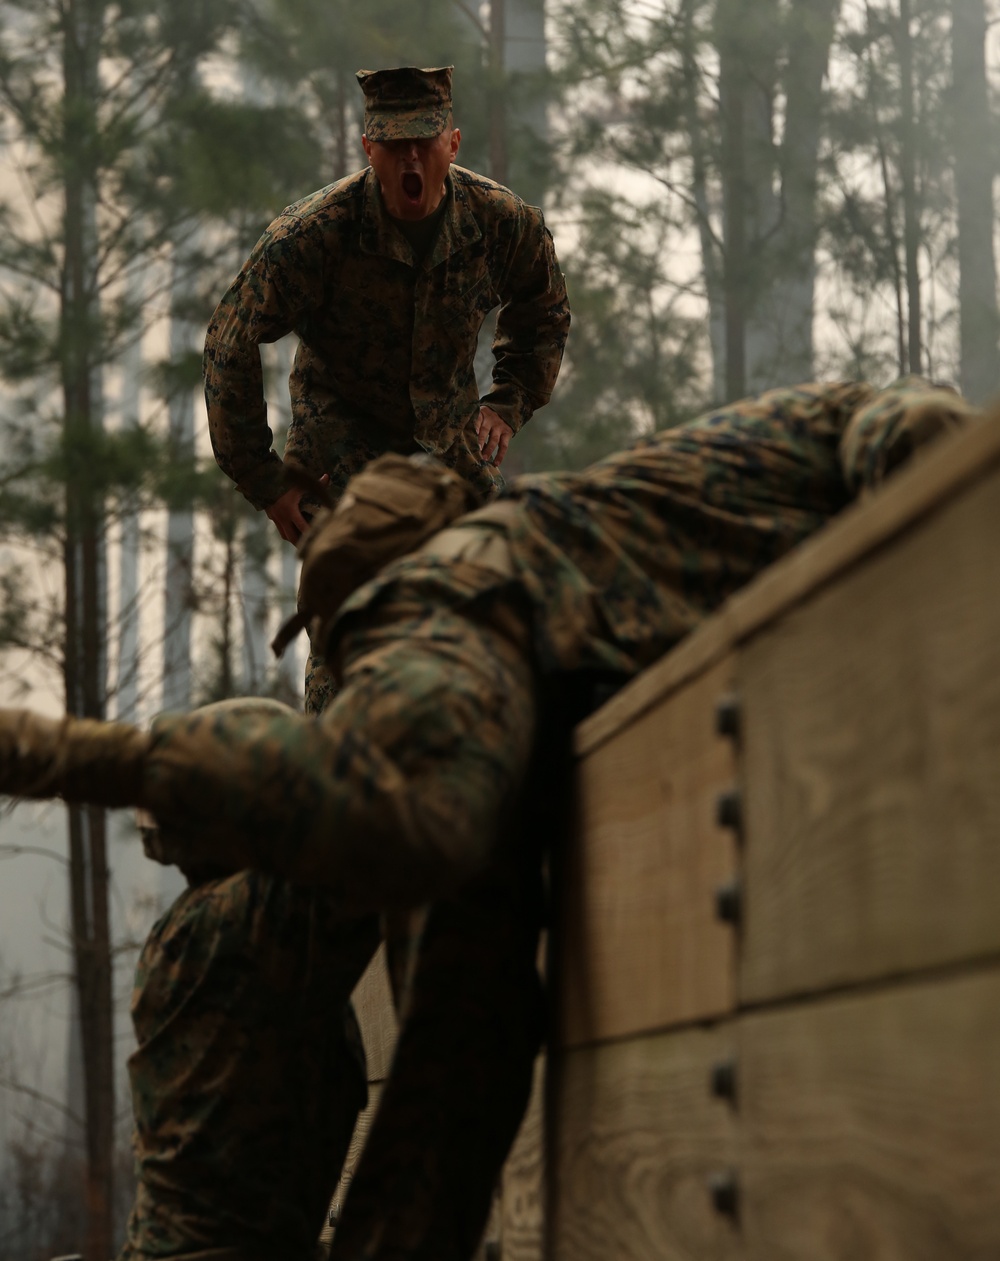 Photo Gallery: Marine recruits get crash course in combat on Parris Island